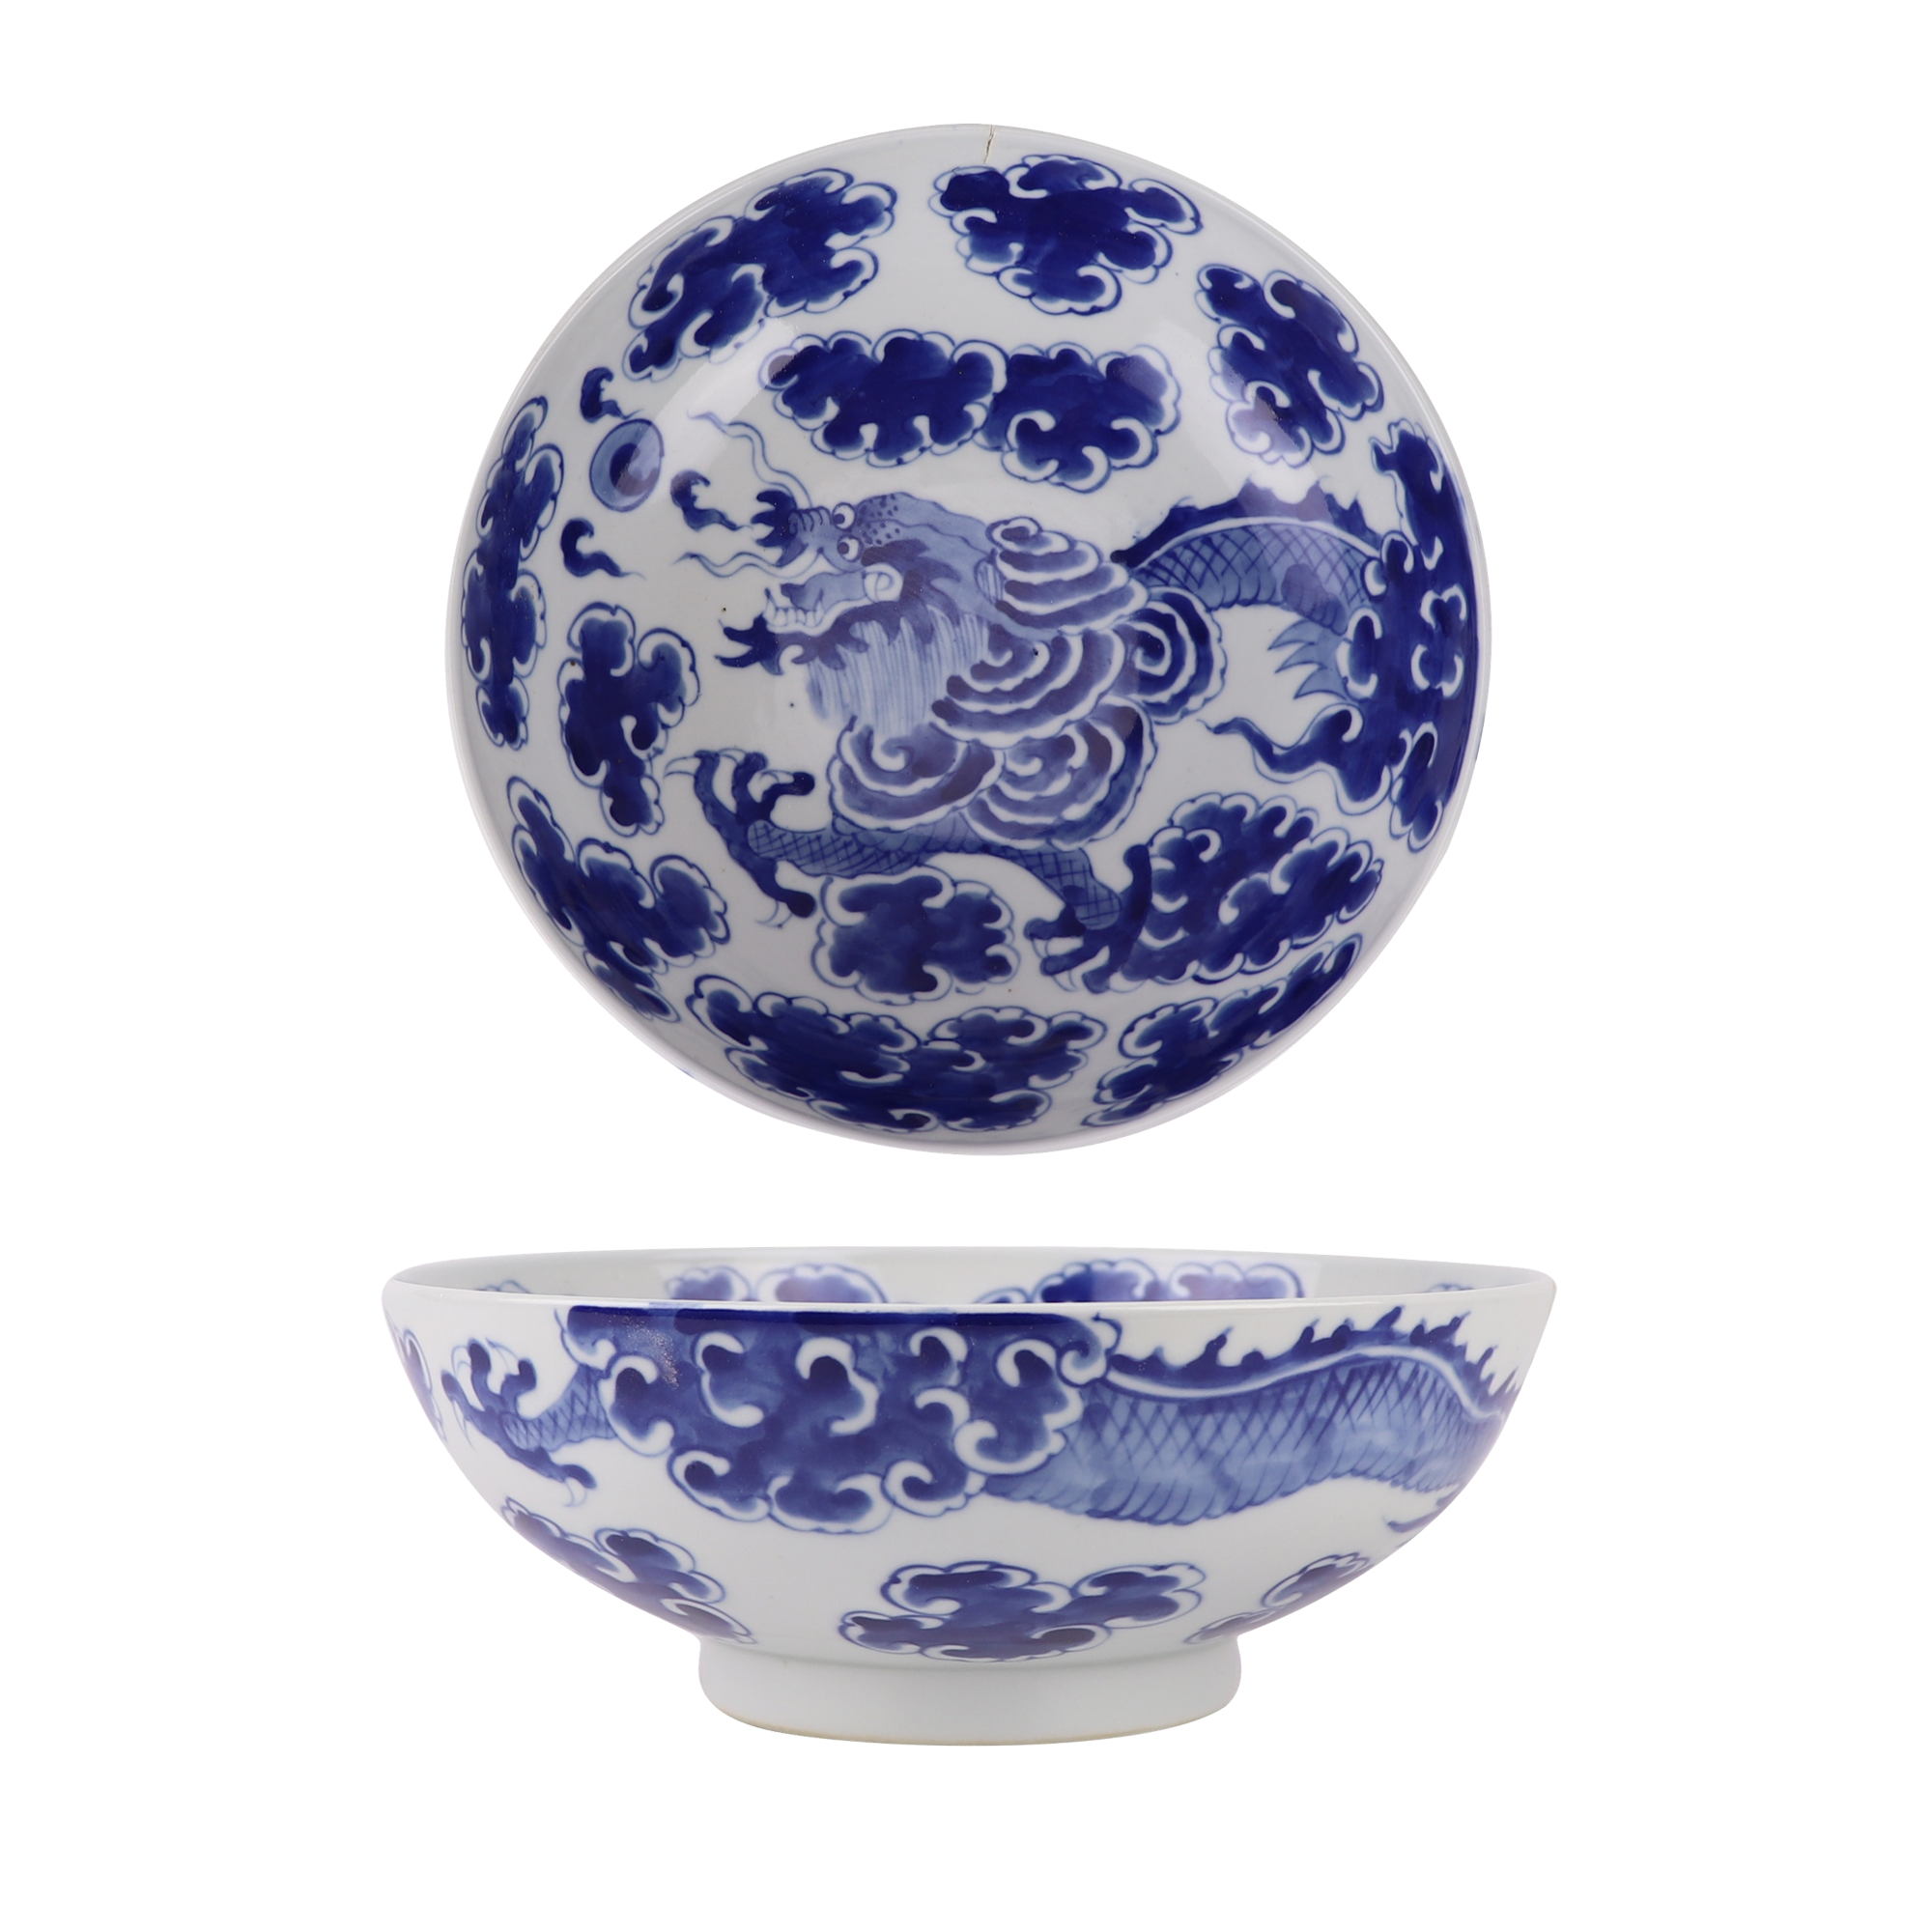 RZUL11 Blue and white Porcelain Dragon in the river and in the cloud Pattern Ceramic Decorative Plate